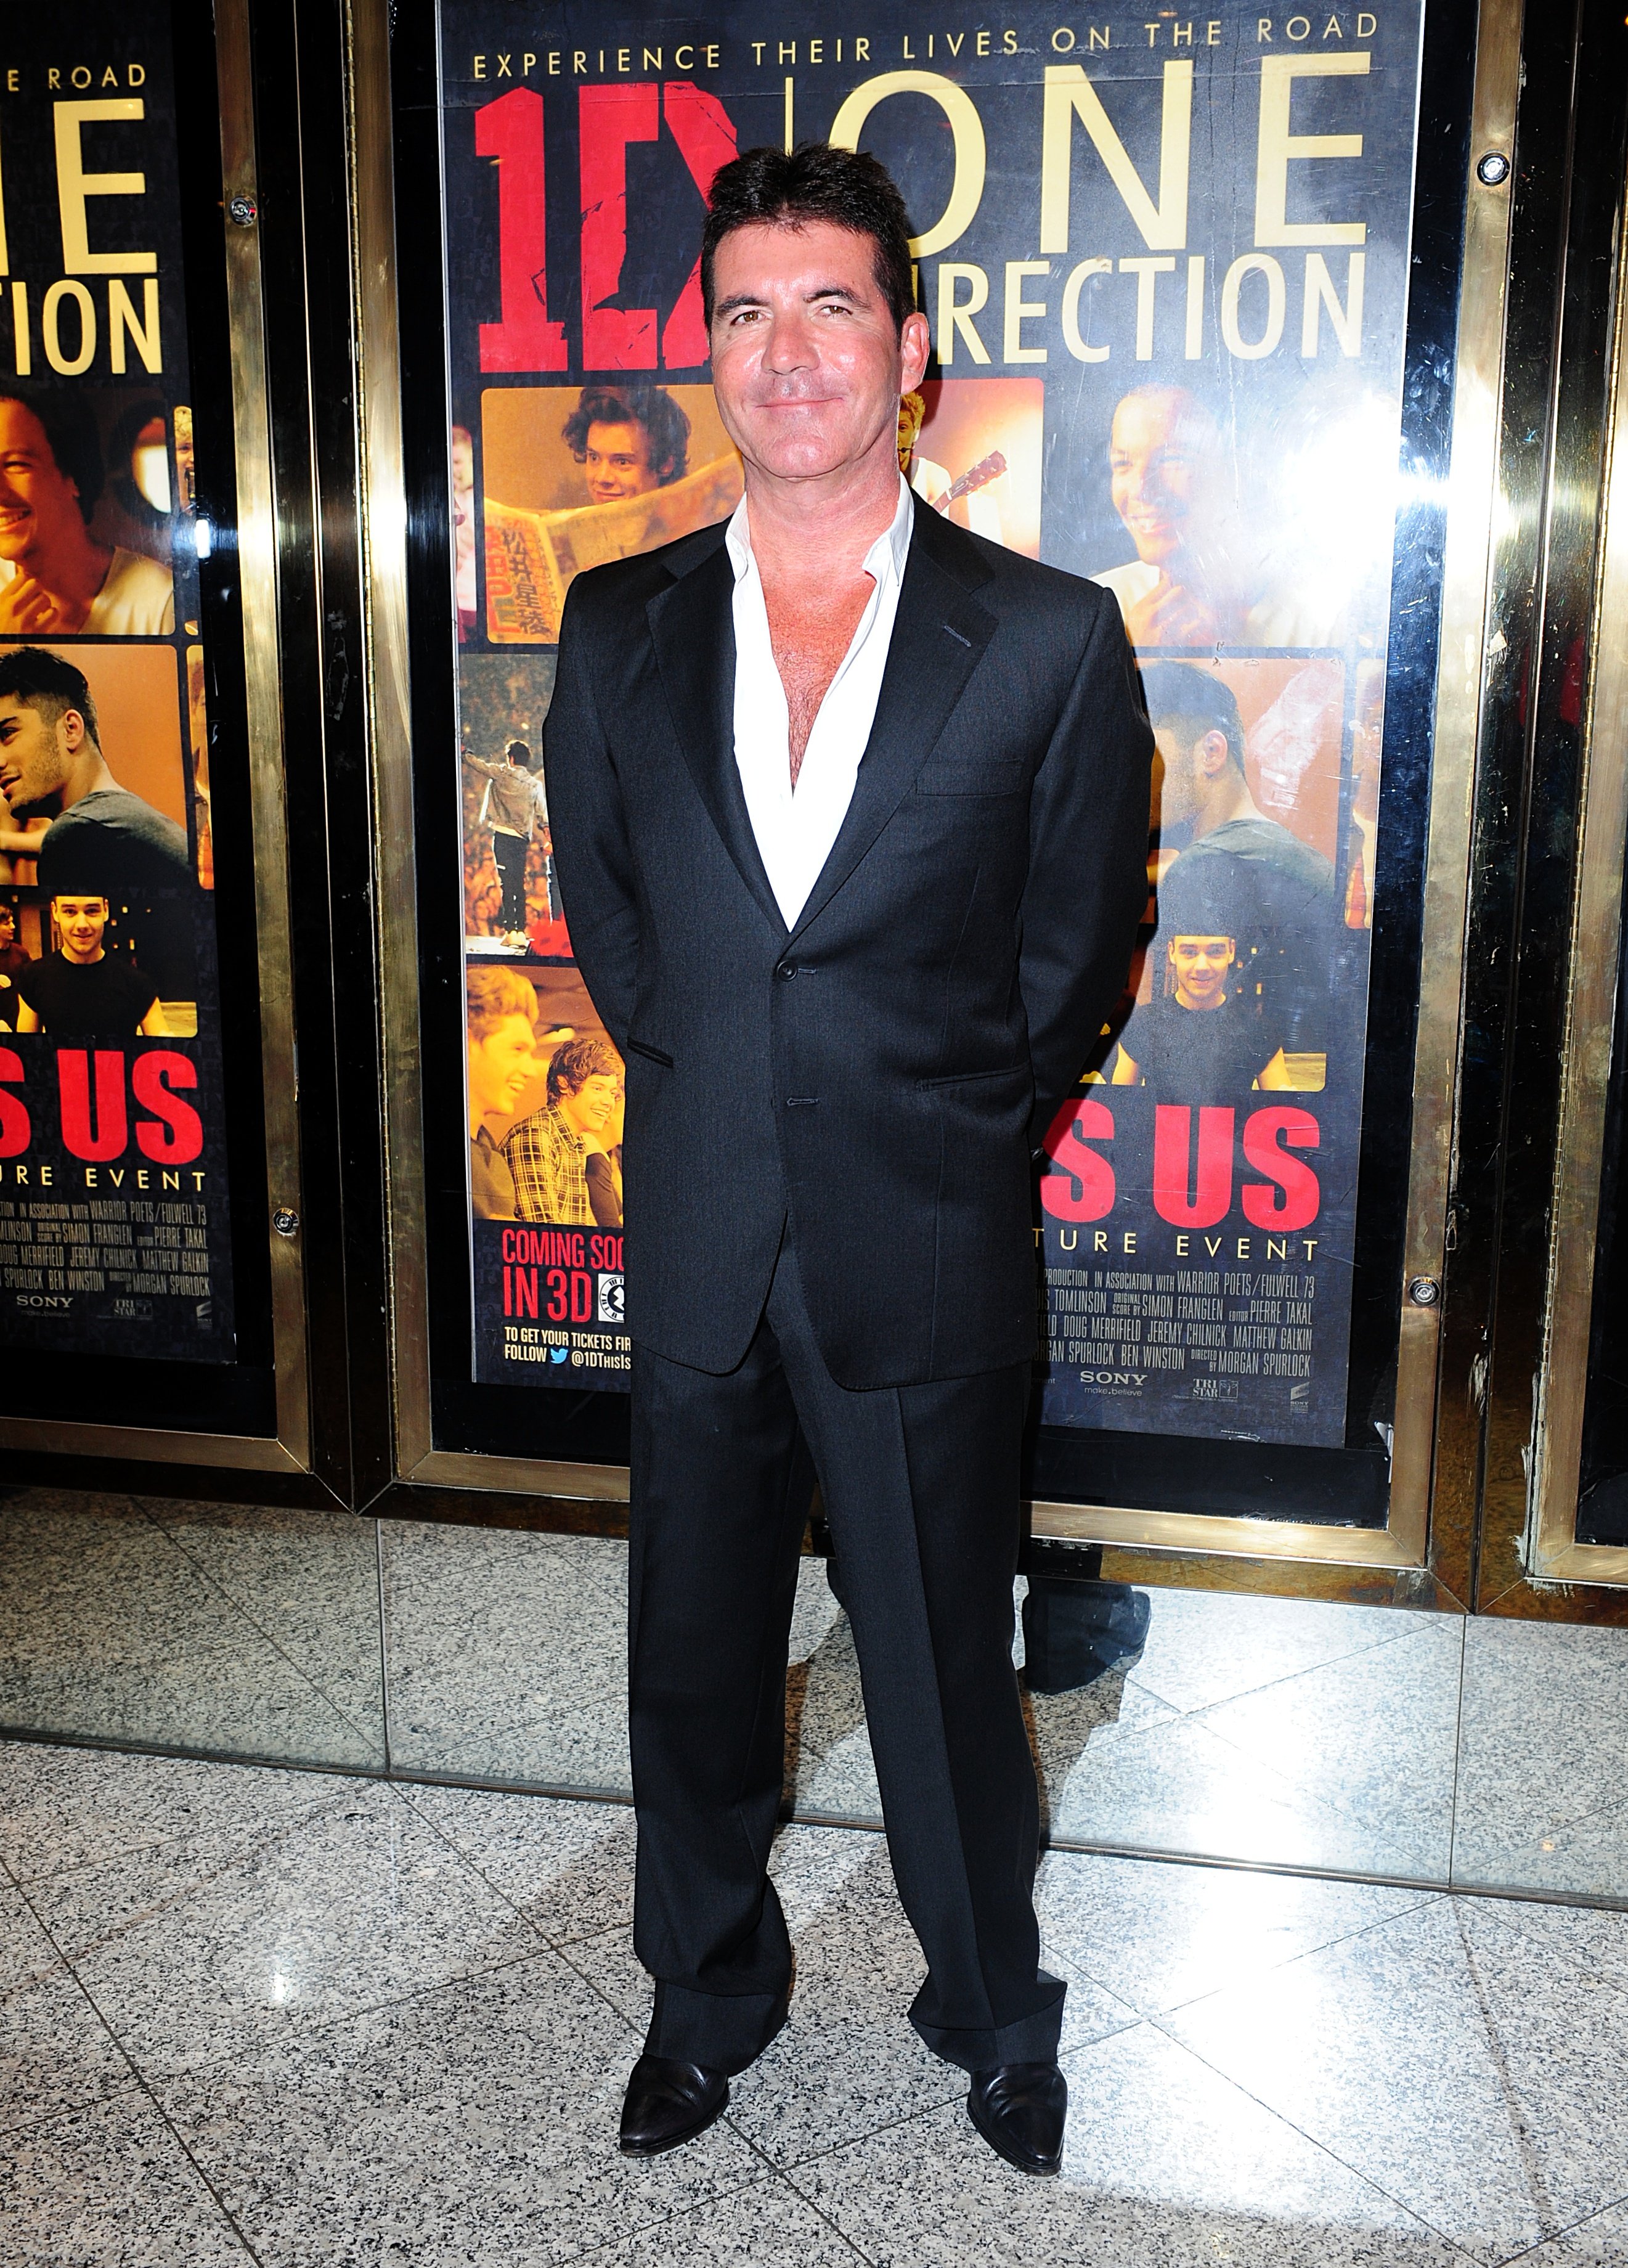 Simon Cowell bei der Weltpremiere von One Direction: This Is Us im Empire Leicester Square, London am 20. August 2013 | Quelle: Getty Images